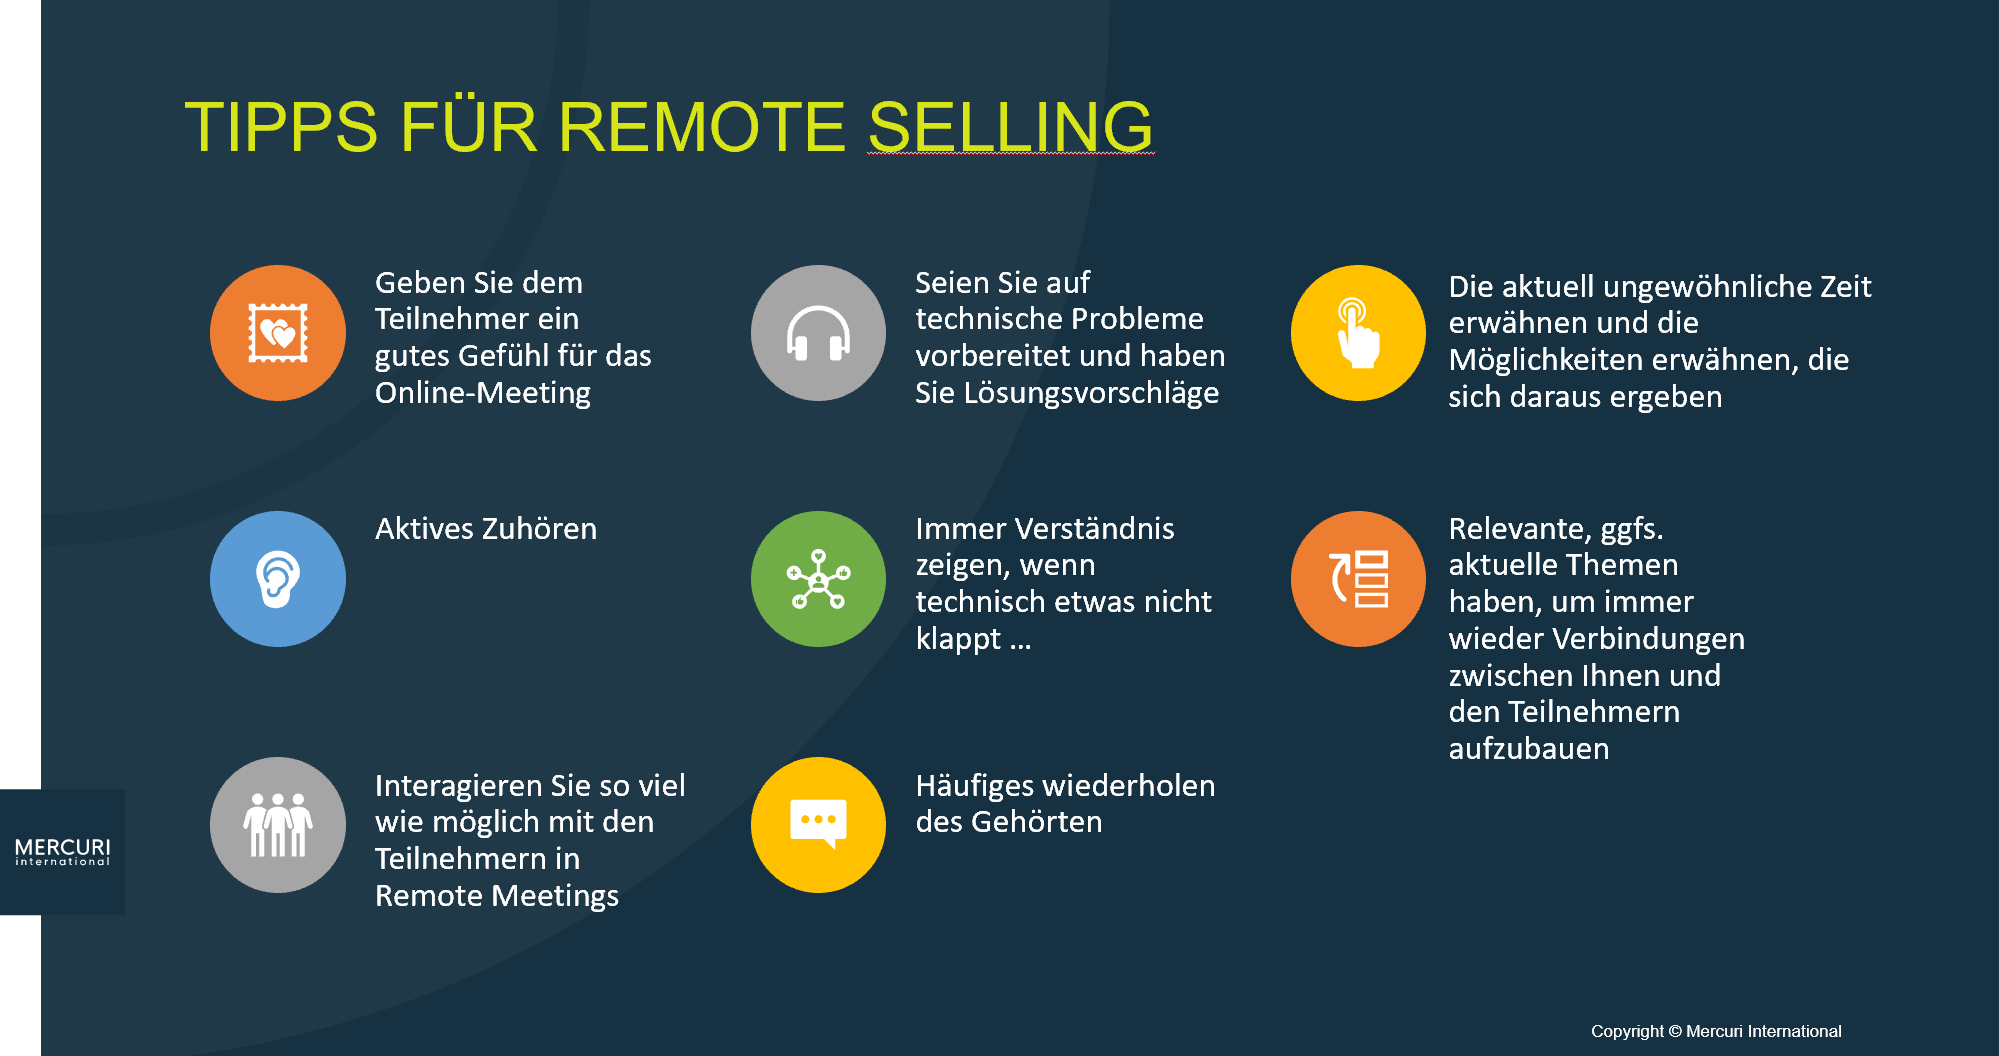 Remote Selling